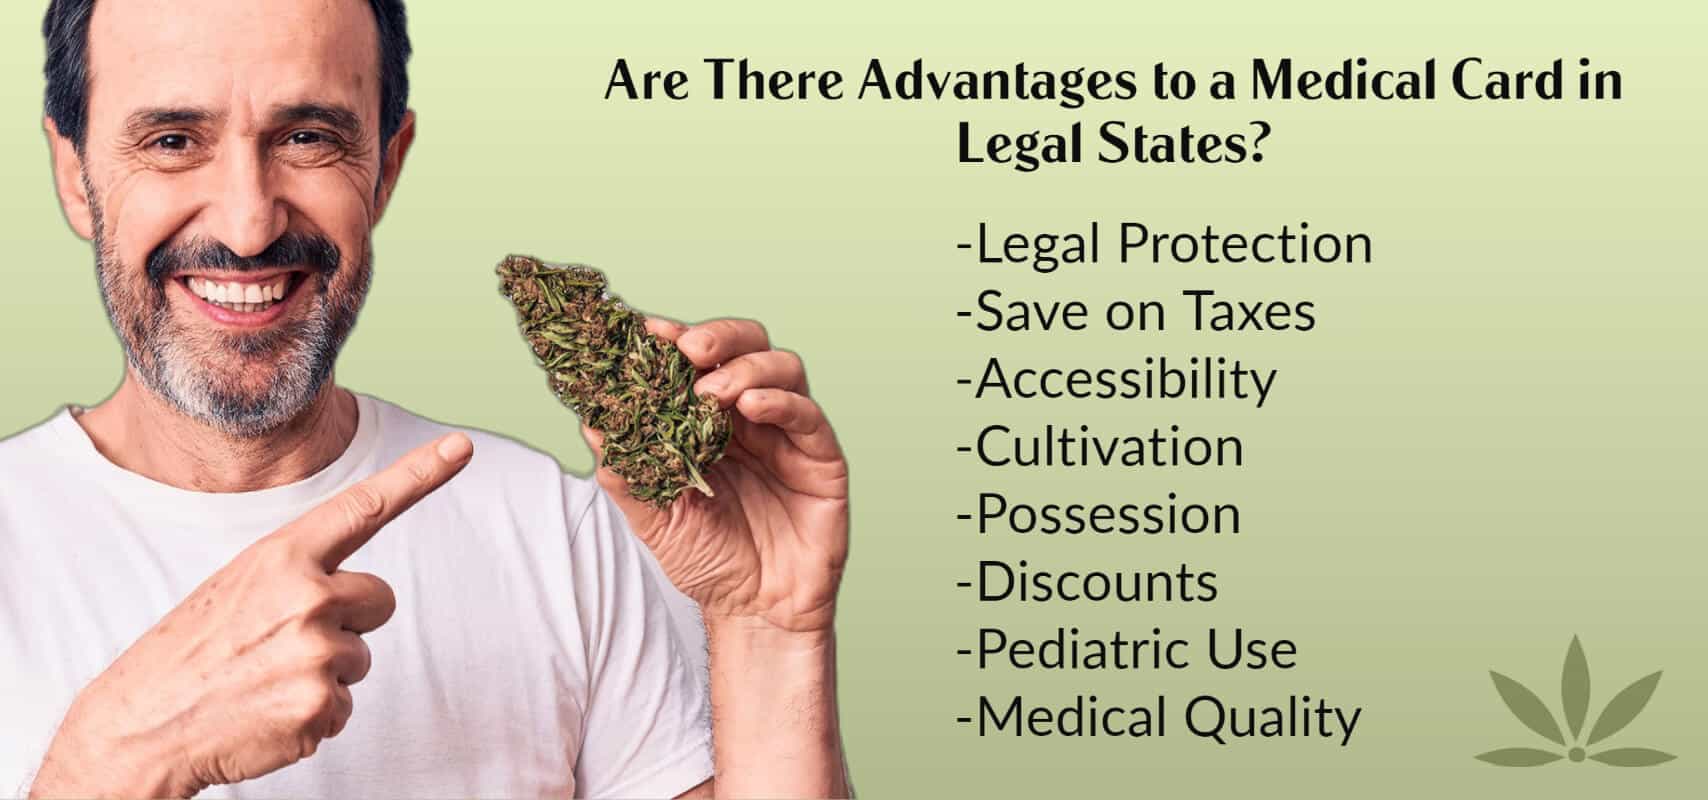 A smiling man holds a cannabis bud because he realizes there are advantages to getting a medical cannabis card certification in his state even though it's recreational legal. 